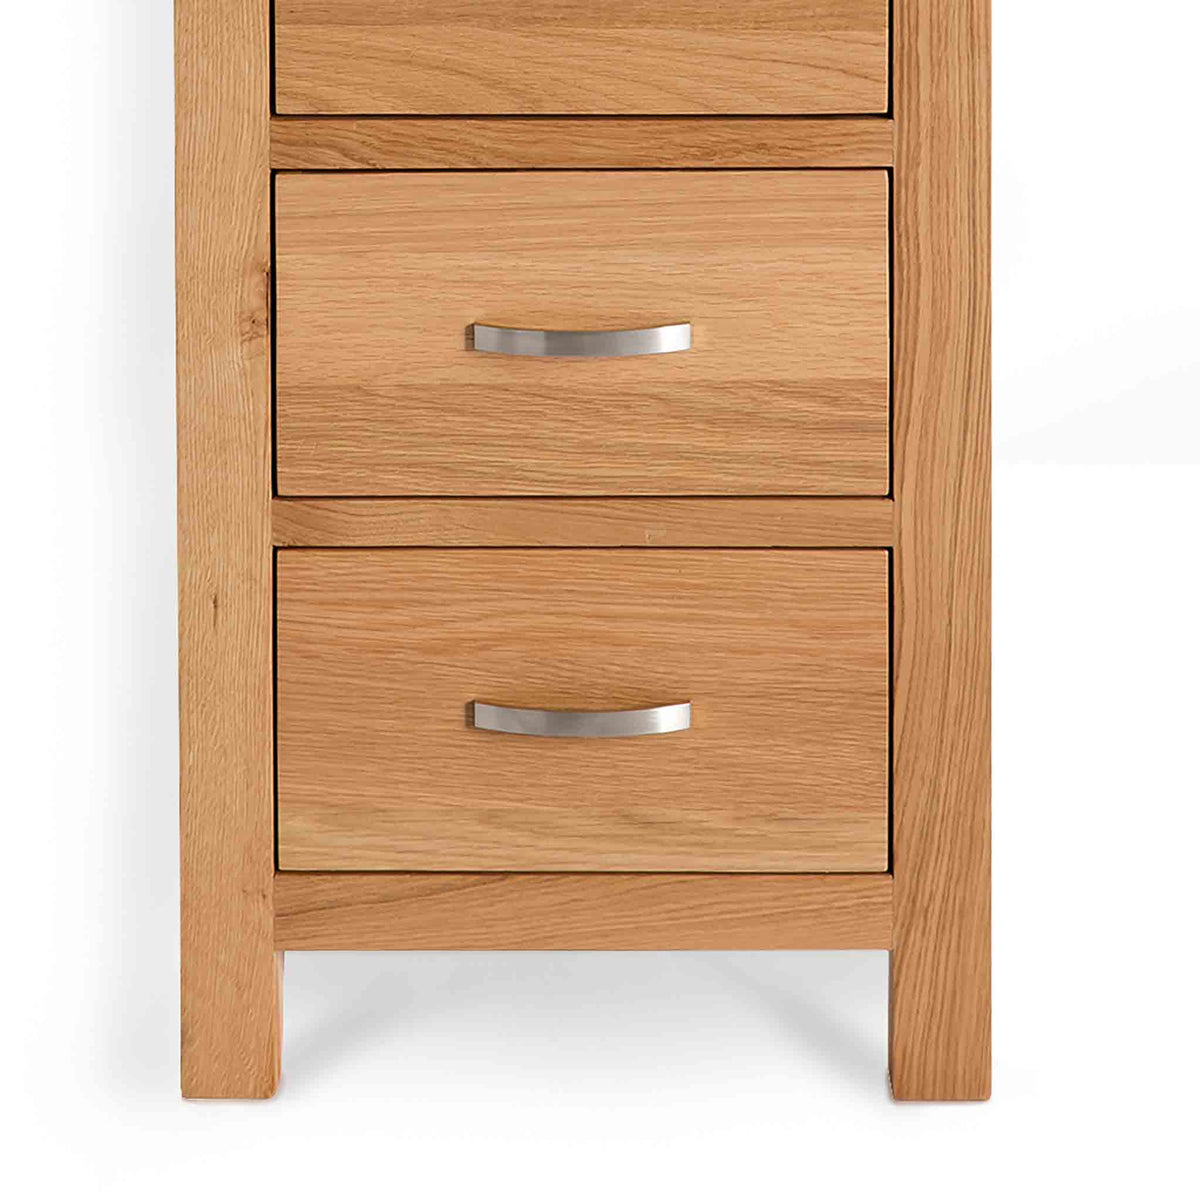  London Oak Tallboy Chest - Close up of bottom drawers and feet